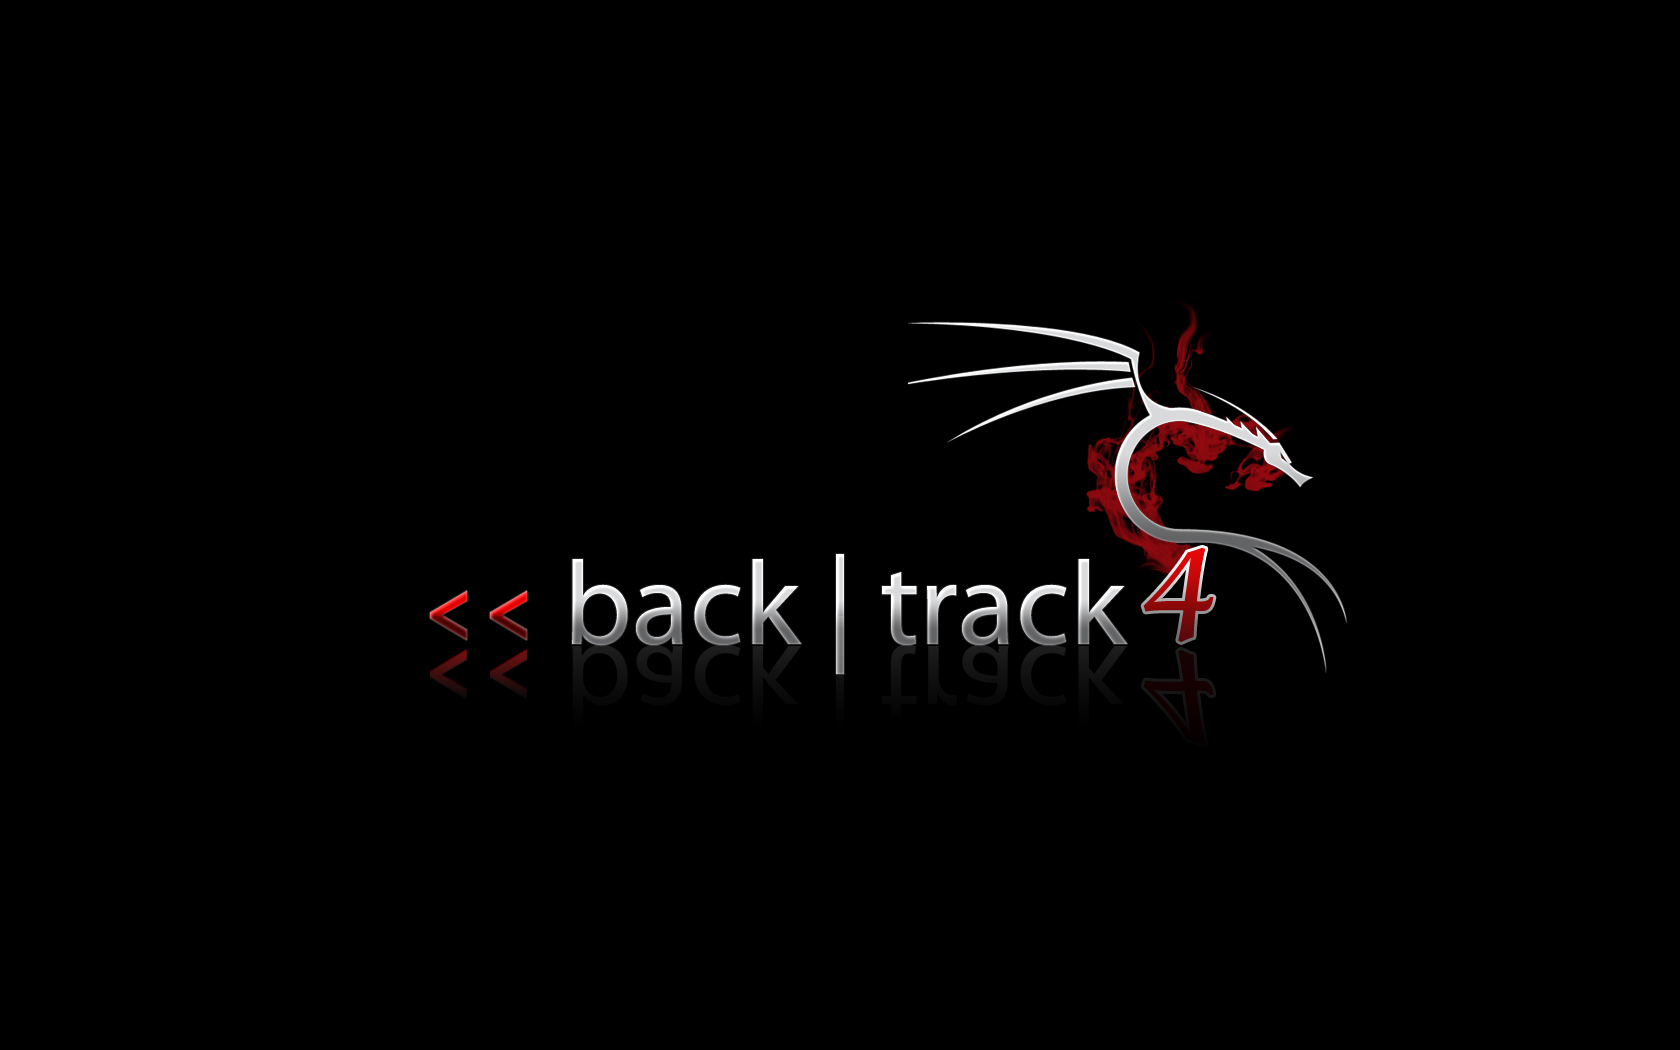 Backtrack Pre Final Public Release And